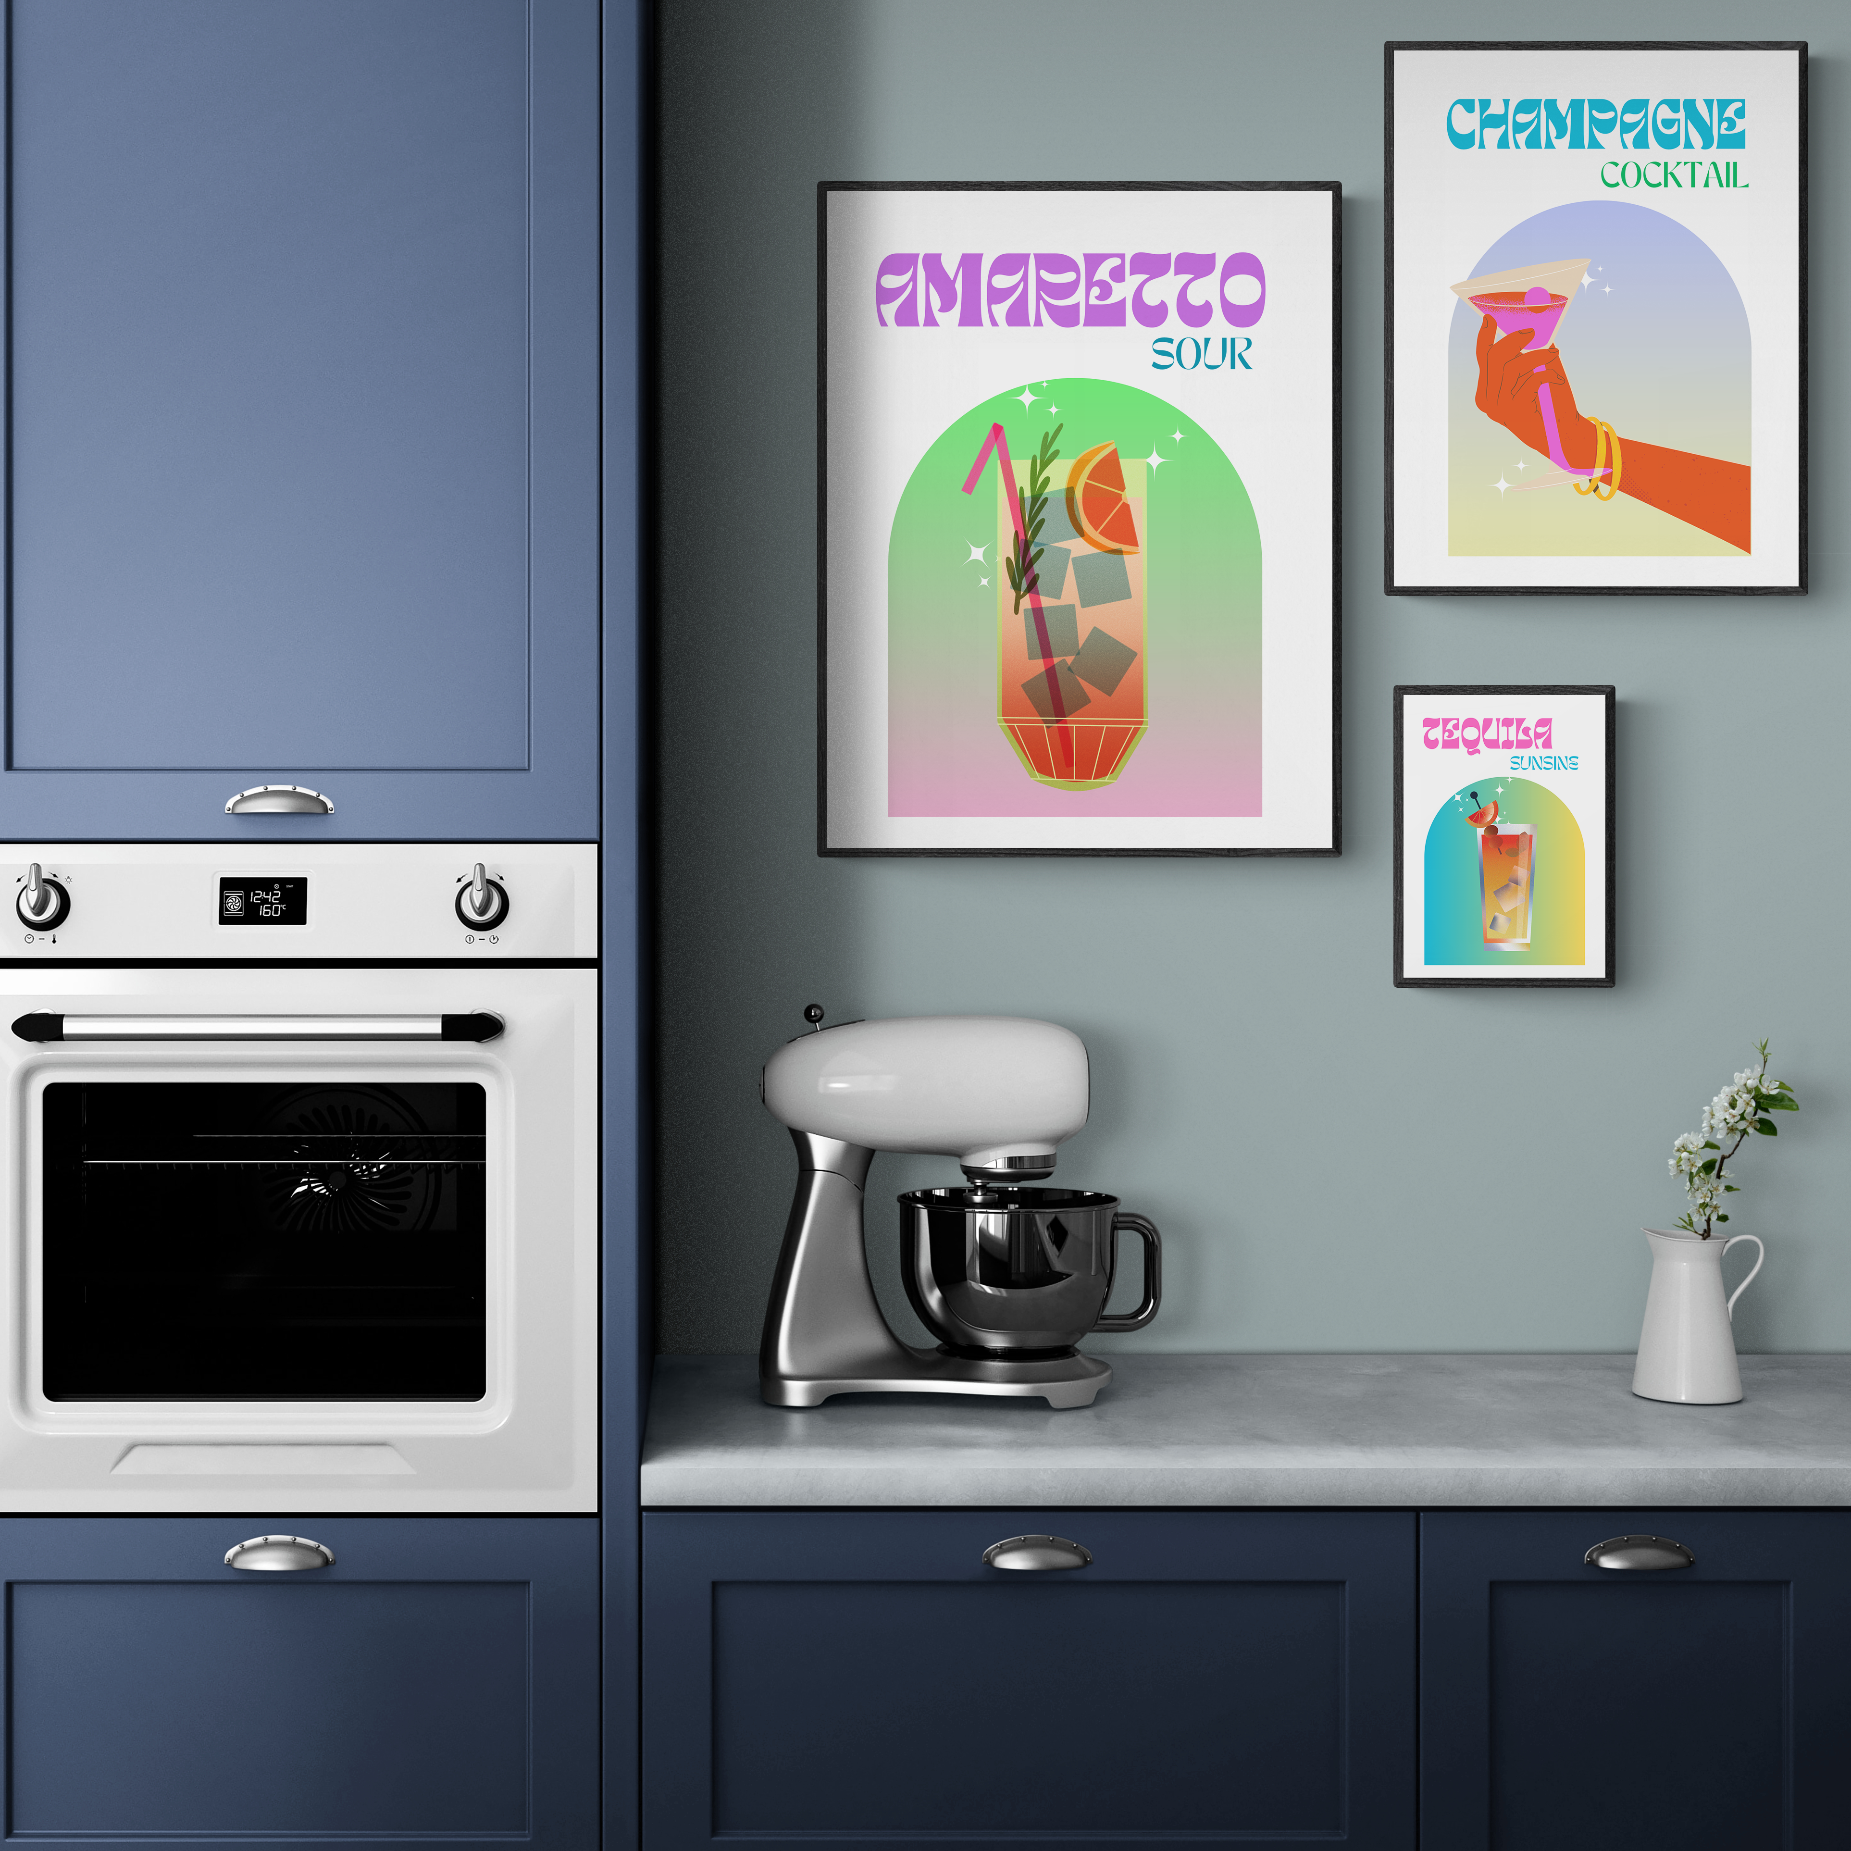 This Daiquiri Cocktail Print features a recipe from a popular poster artist. It's a vibrant wall art piece perfect for the kitchen or bar cart, with a colorful cocktail illustration, Boho and Retro themes, and a popular art style inspired by classic posters. Discover the perfect cocktail gift and add some flavor to any wall with this eye-catching art piece.